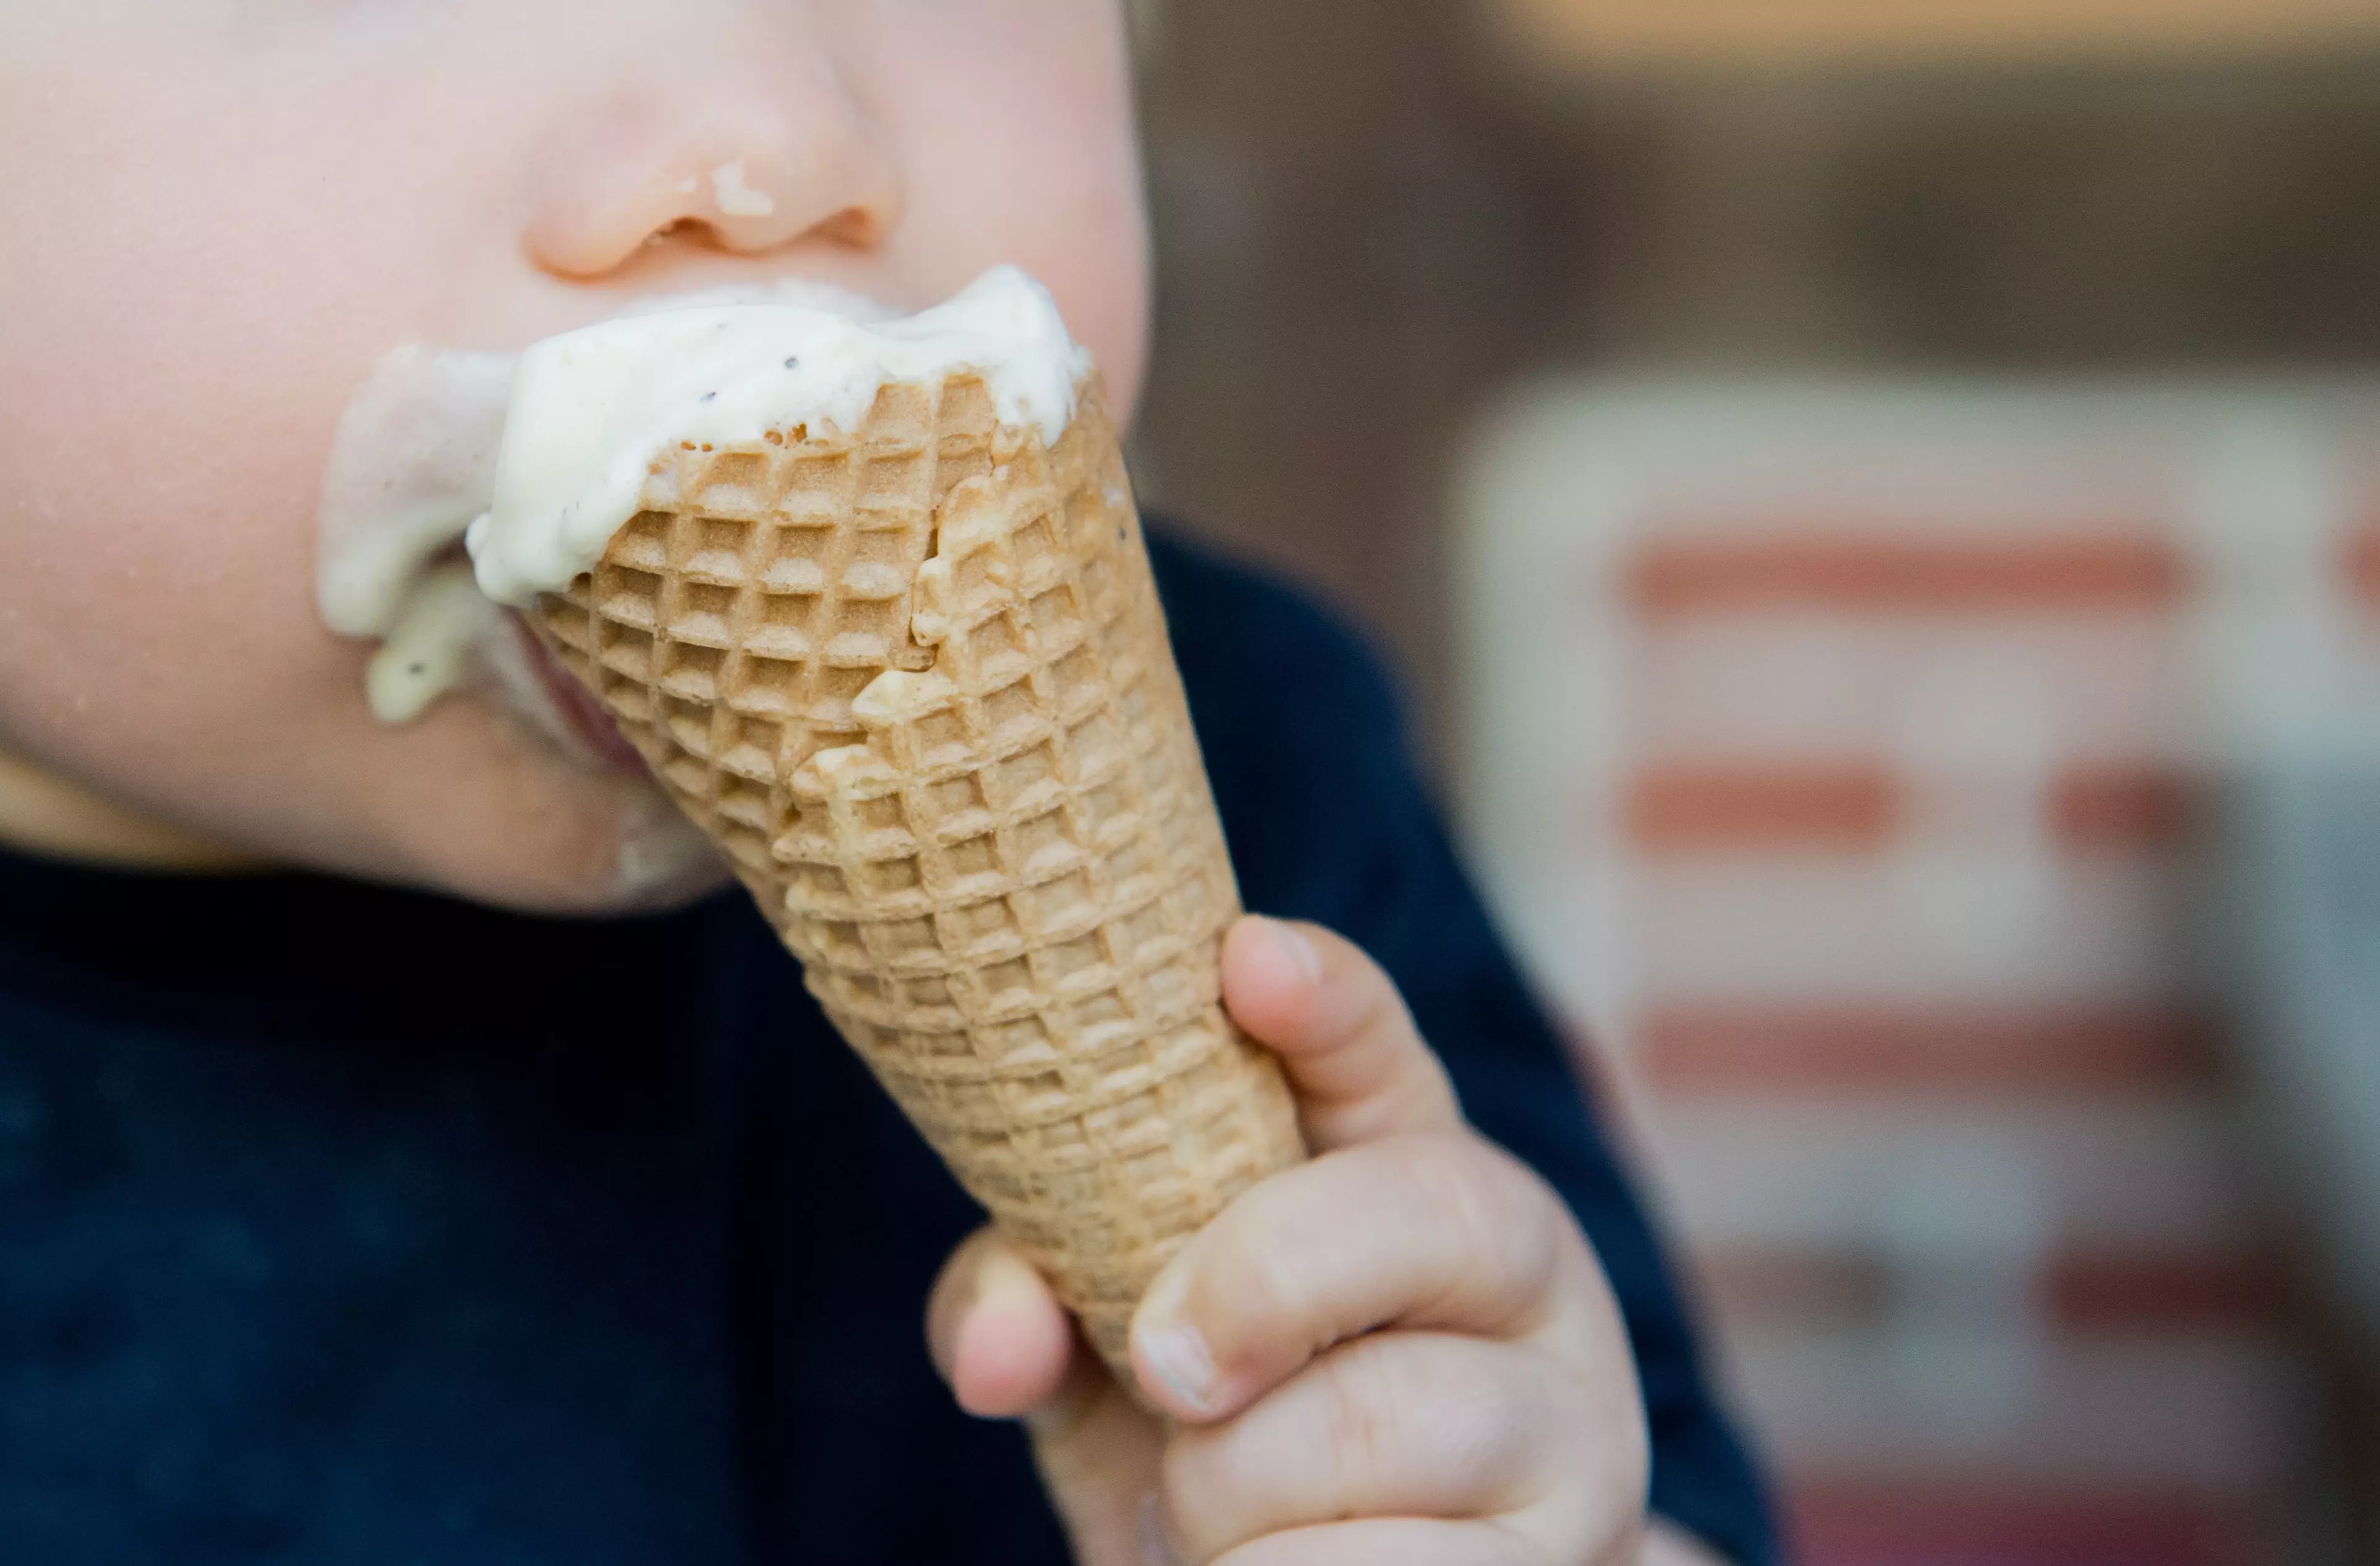 Mum Sidney Anderson got a nasty surprise when she shared an ice cream with her four-year-old.